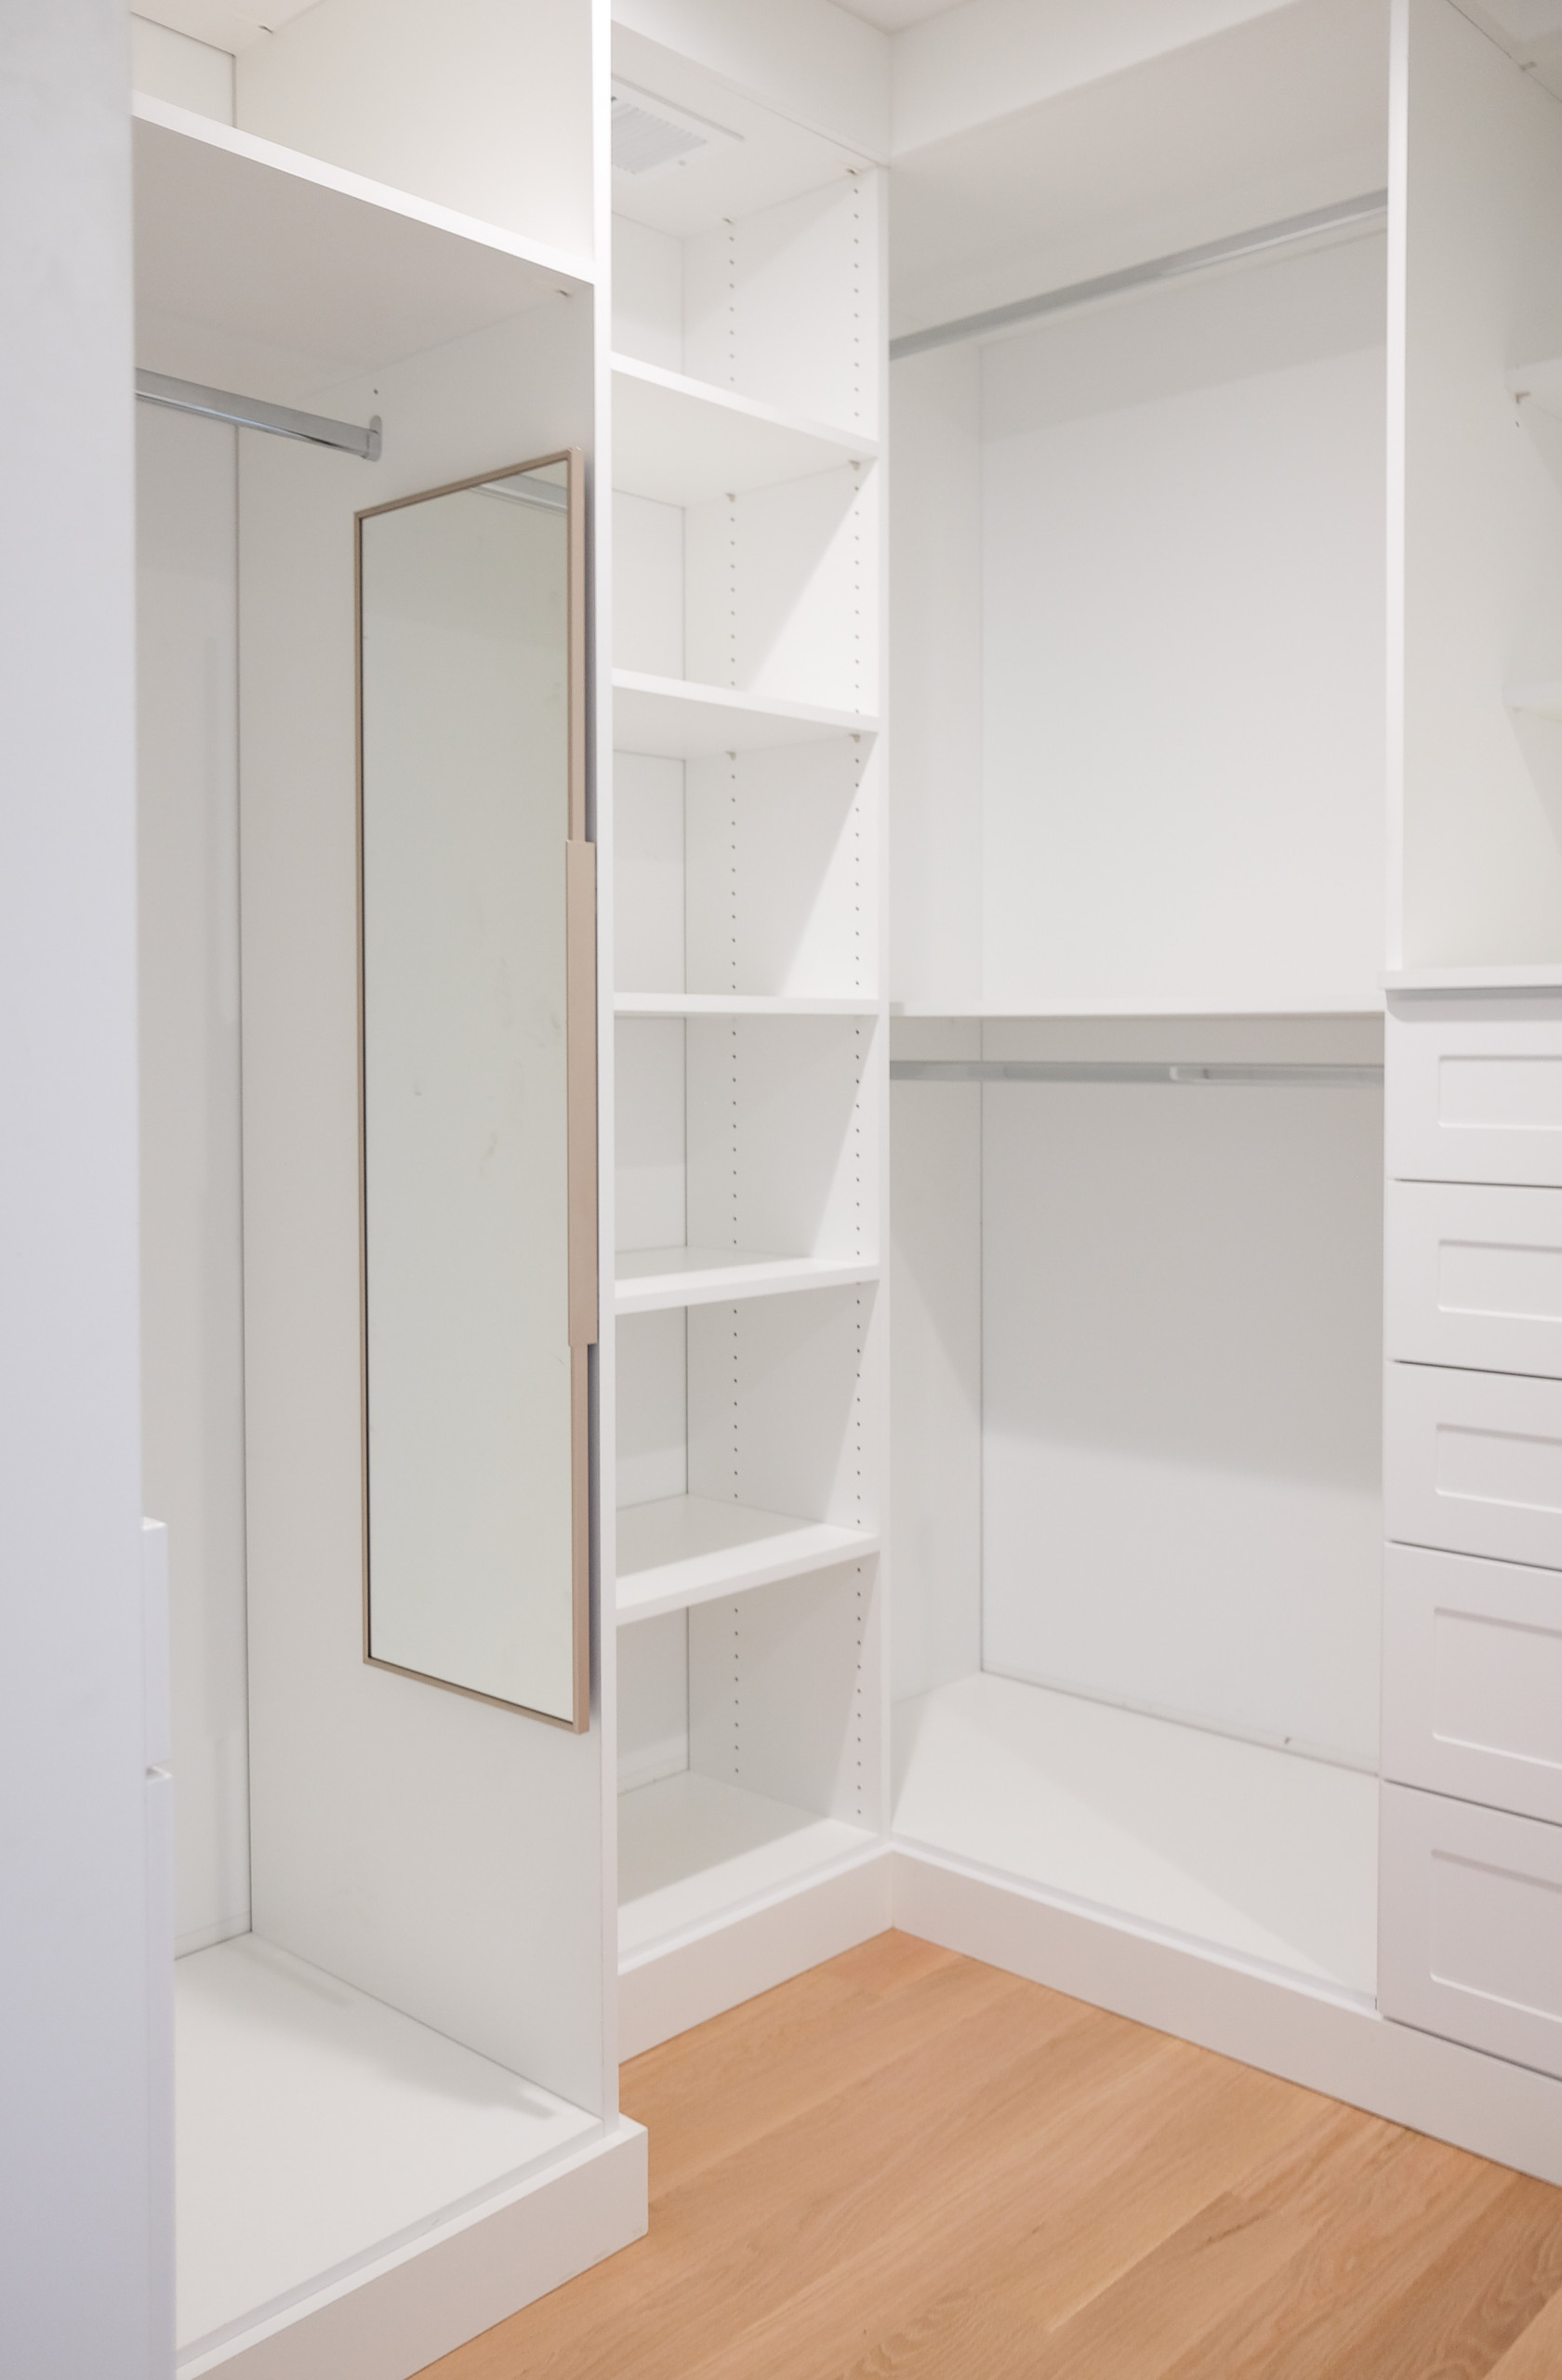 Primary Bedroom and Walk-in Closets